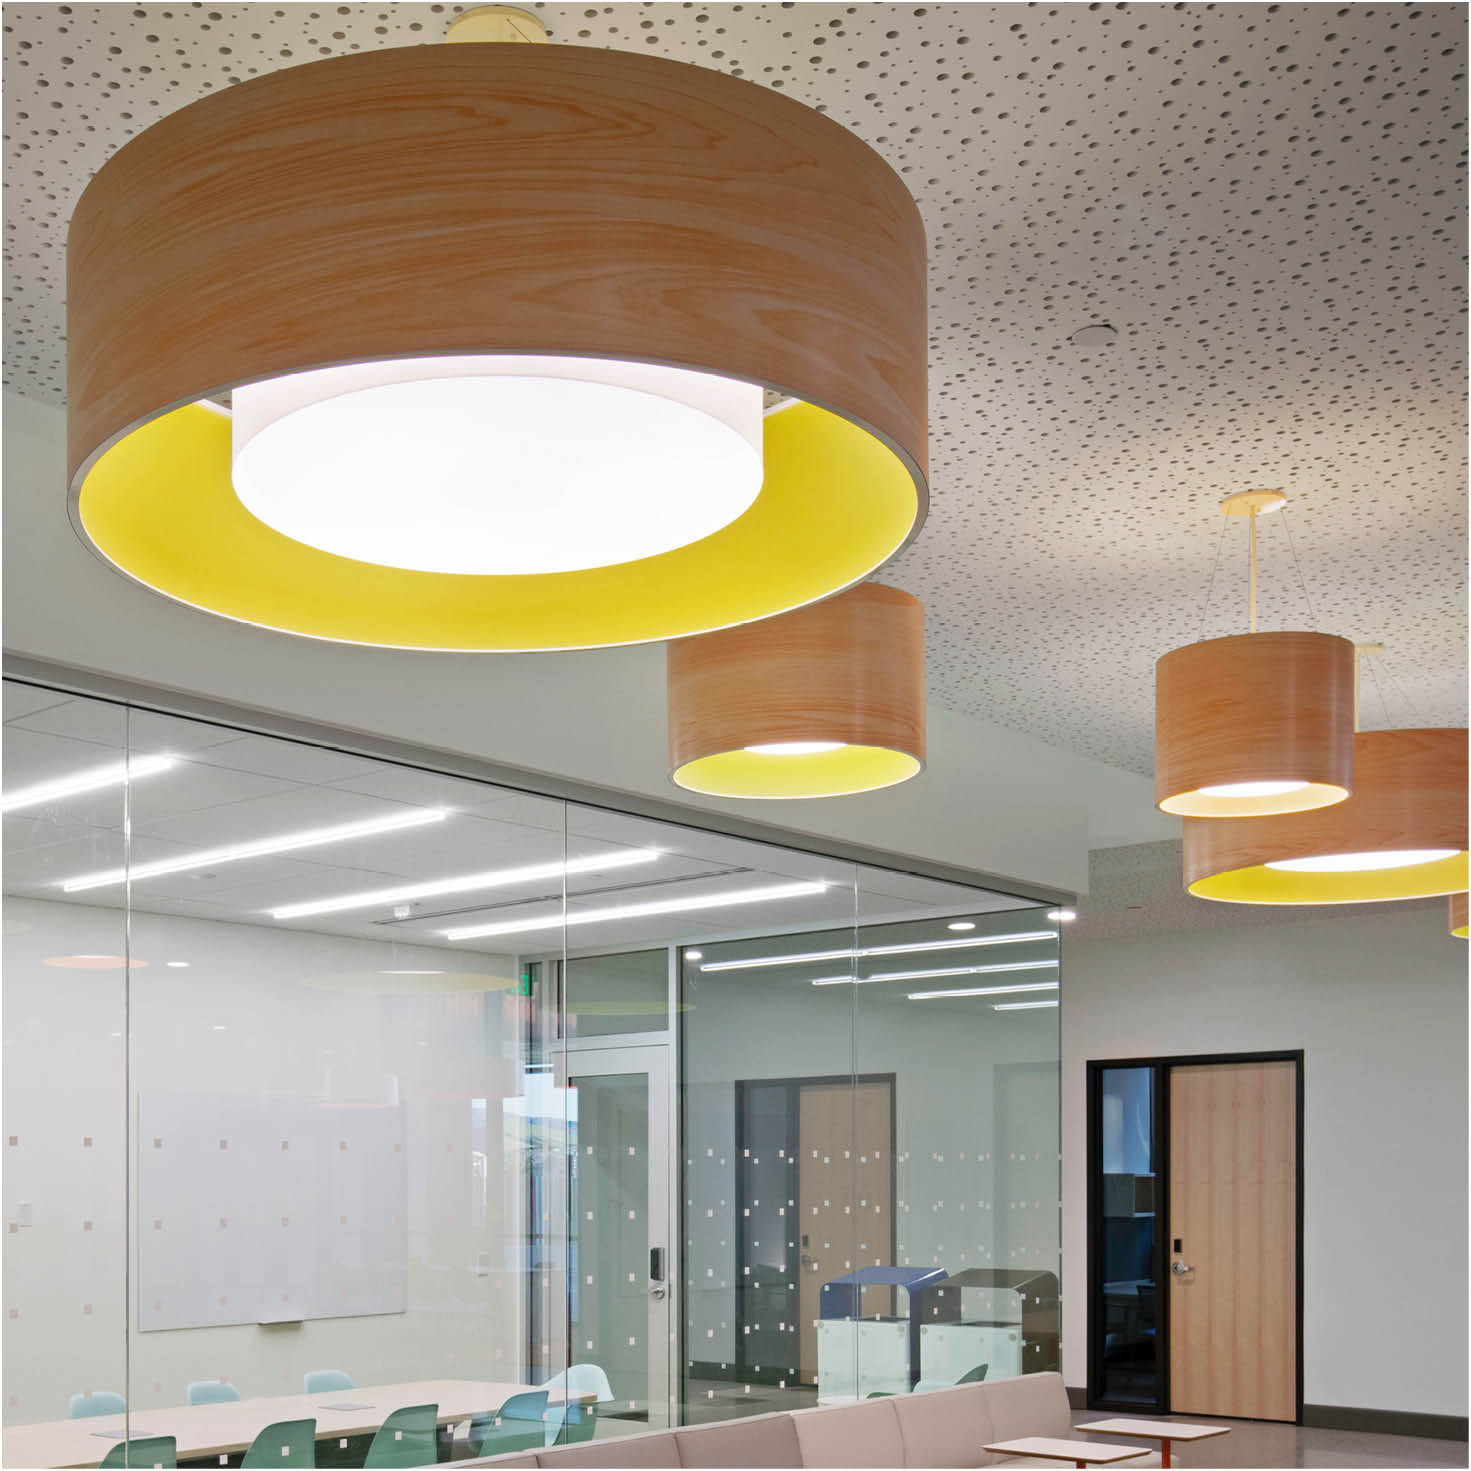 Lumetta’s Acoustic Collection consists of drums, tapers, and linear shapes that pair illumination and design with sound dampening attributes. Noise levels and vibration are controlled while the synergy between the striking handcrafted luminaires and the superior acoustic features is greatly enhanced.